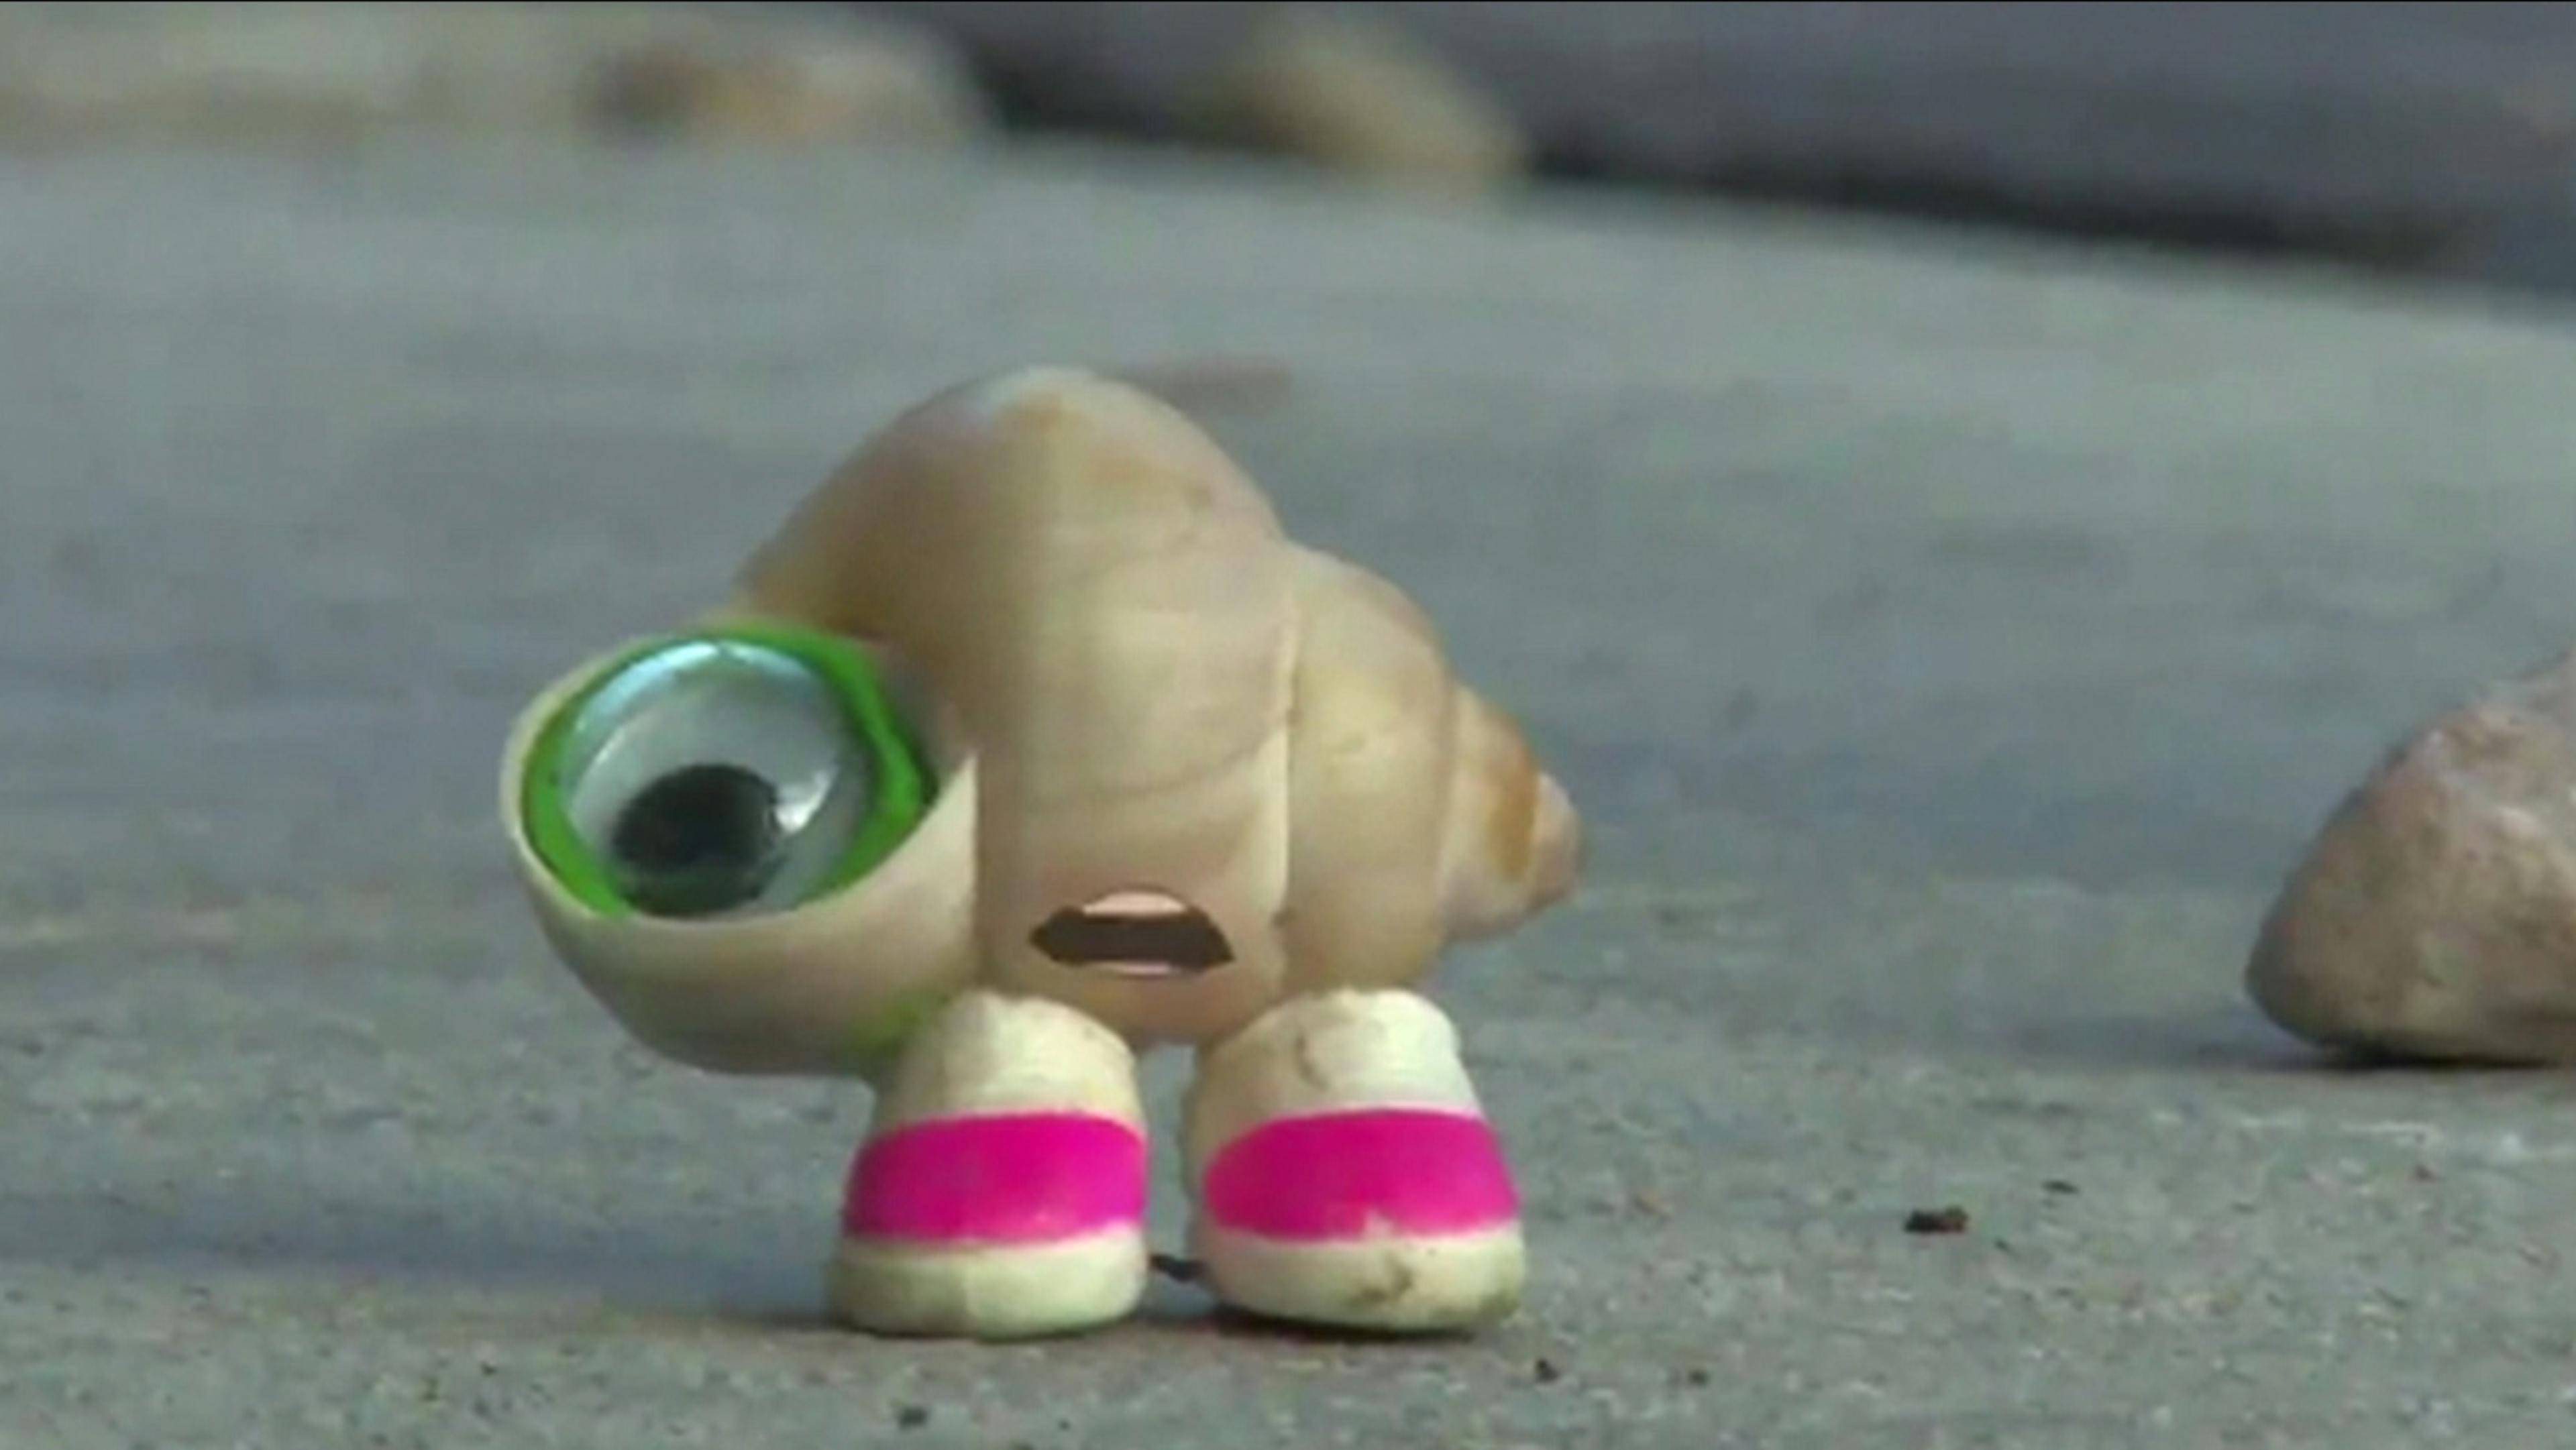 A tiny seashell with a cartoon mouth, googly eye, and white and pink sneakers stands looking shocked